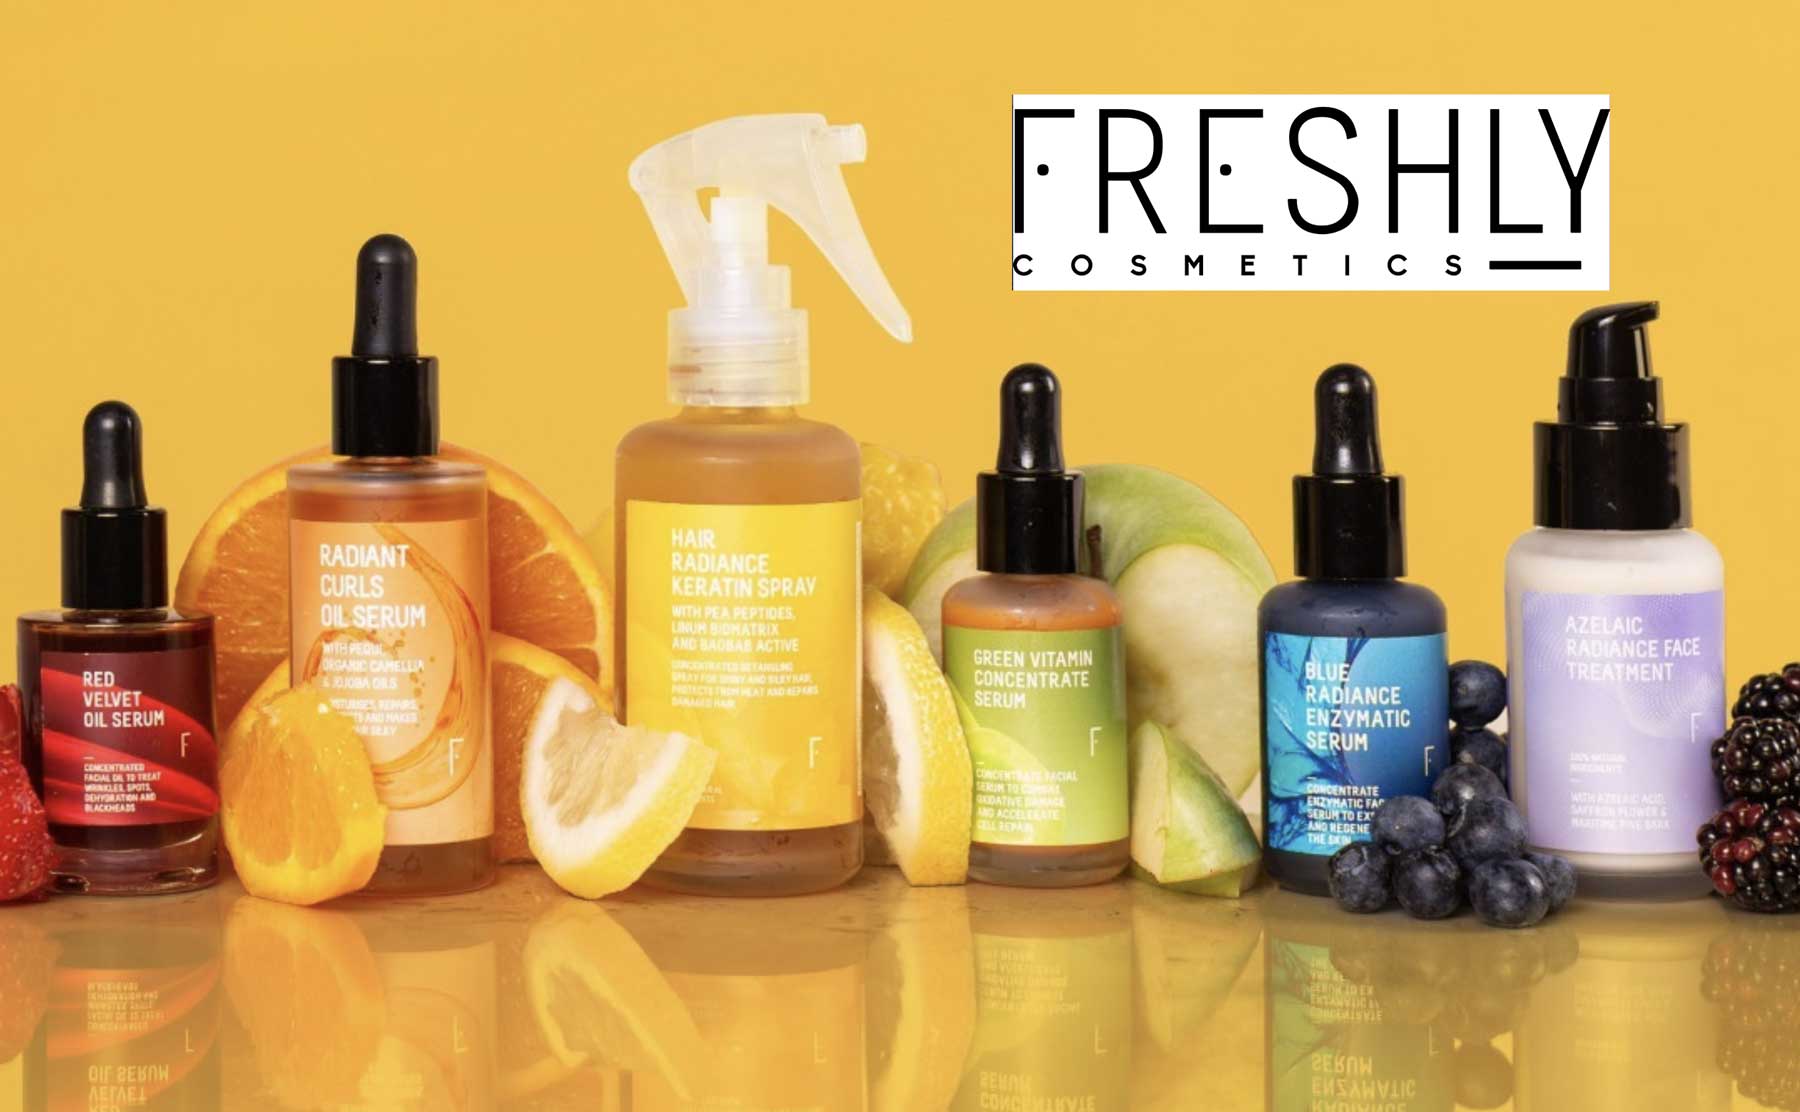 Freshly Cosmetics, Embracing Natural Beauty and Sustainability